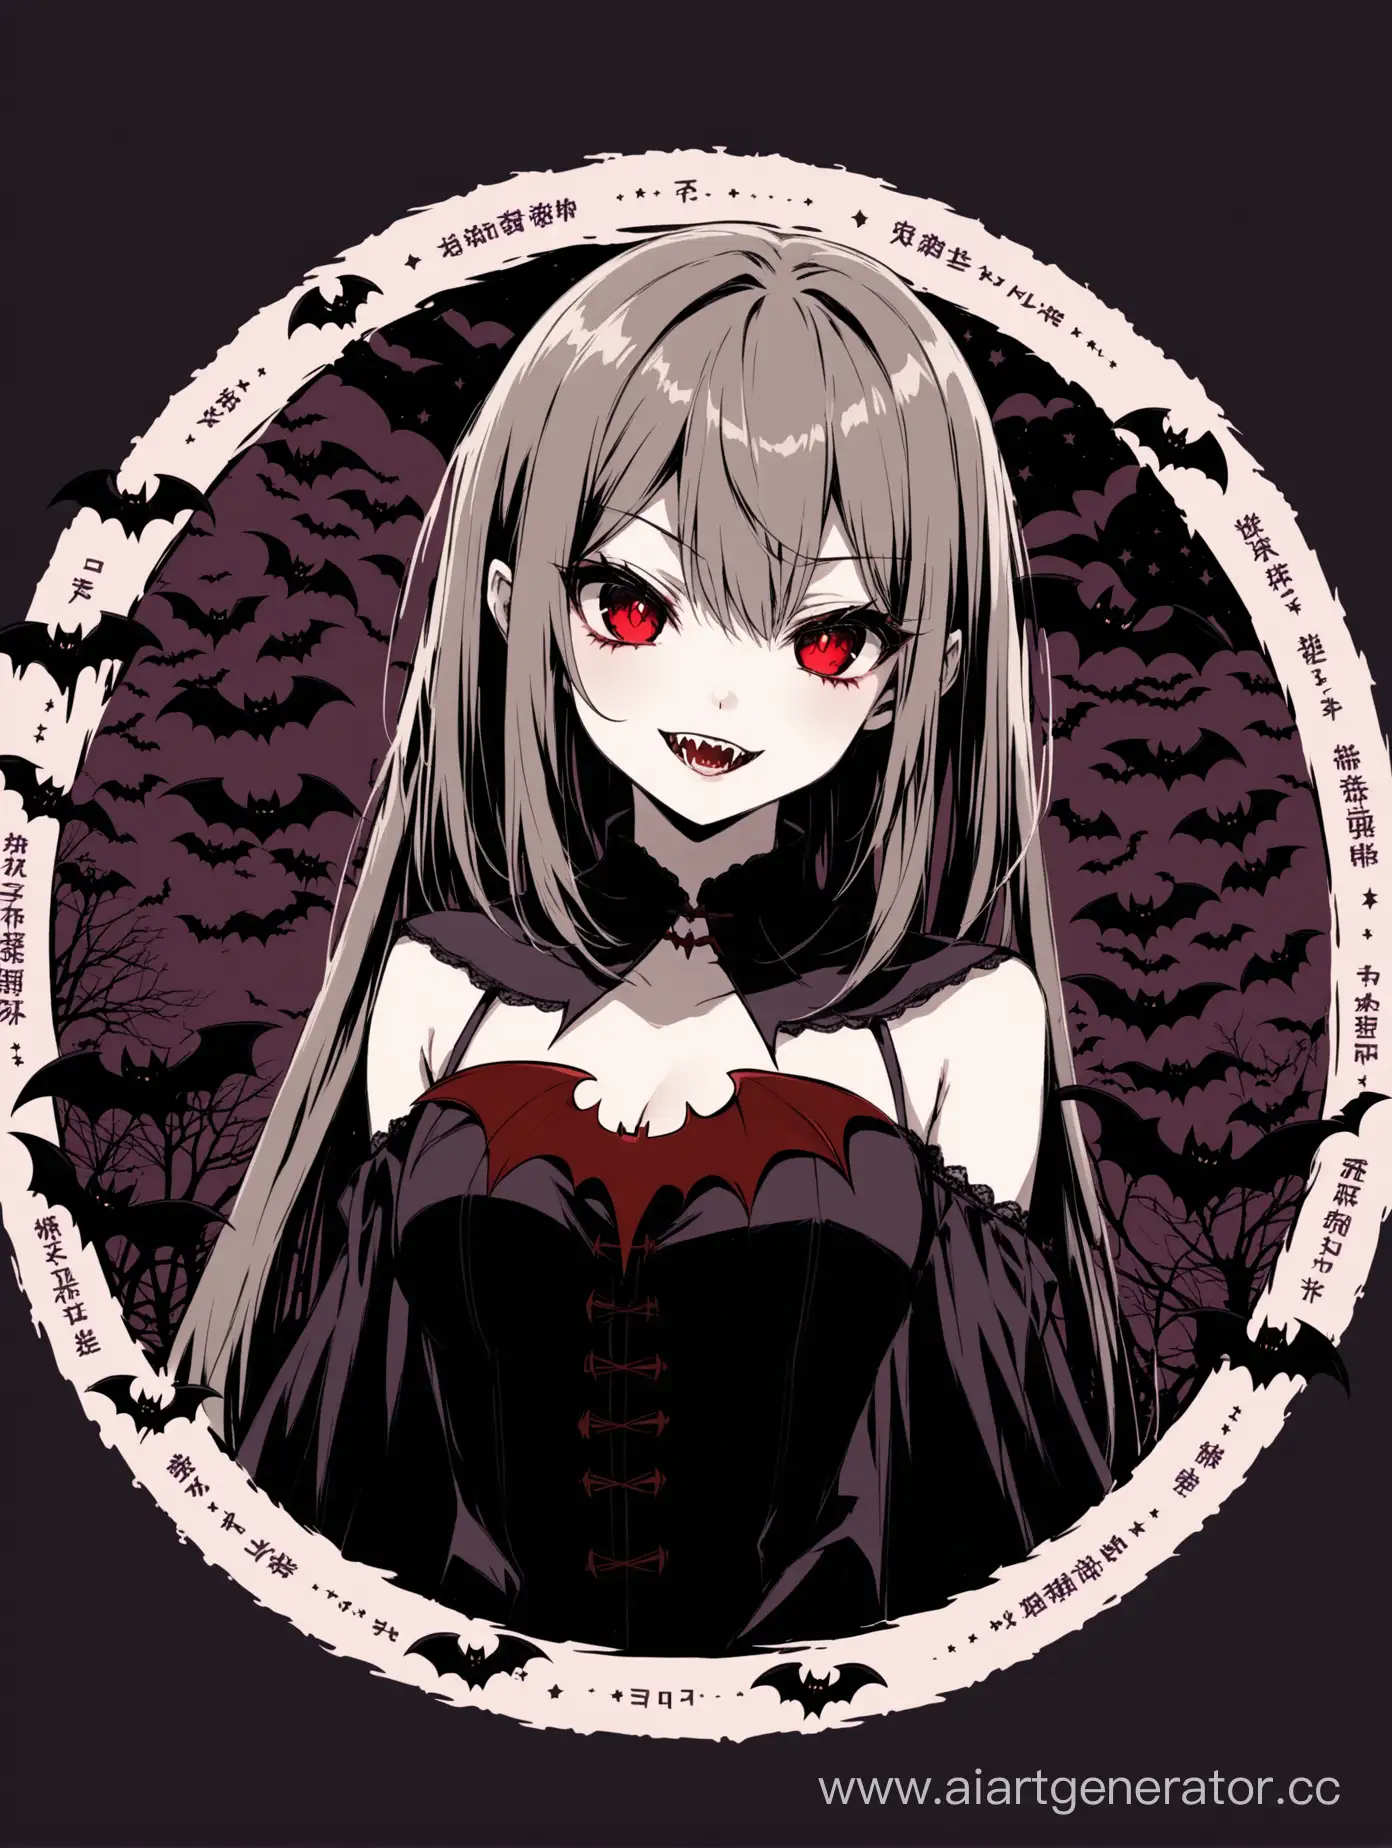 Dark-Anime-Vampire-Girl-Surrounded-by-Bats-with-Inscribed-Circle-VV83